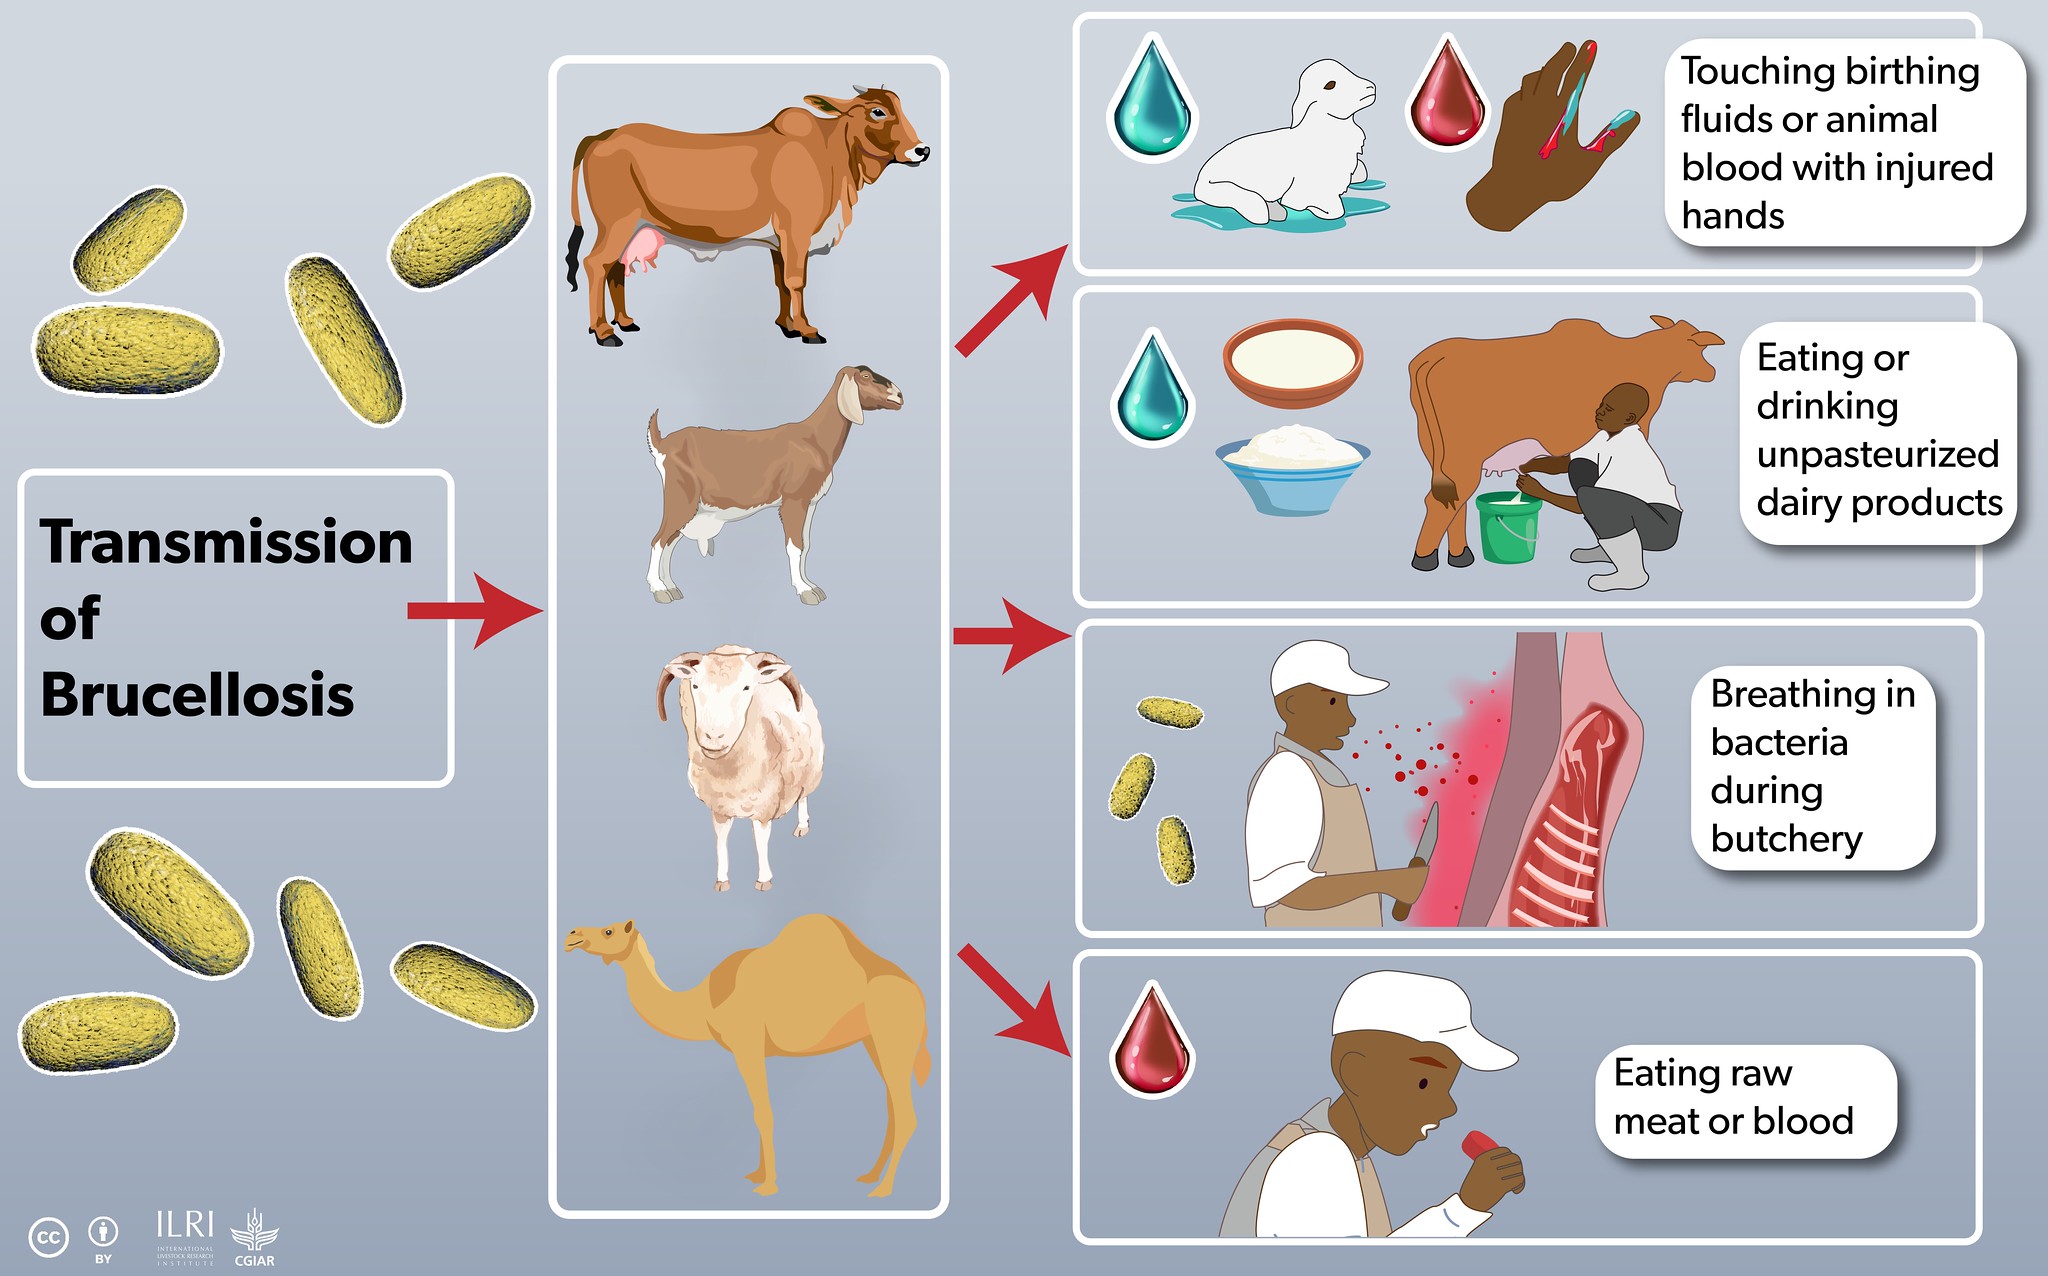 Brucellosis transmission